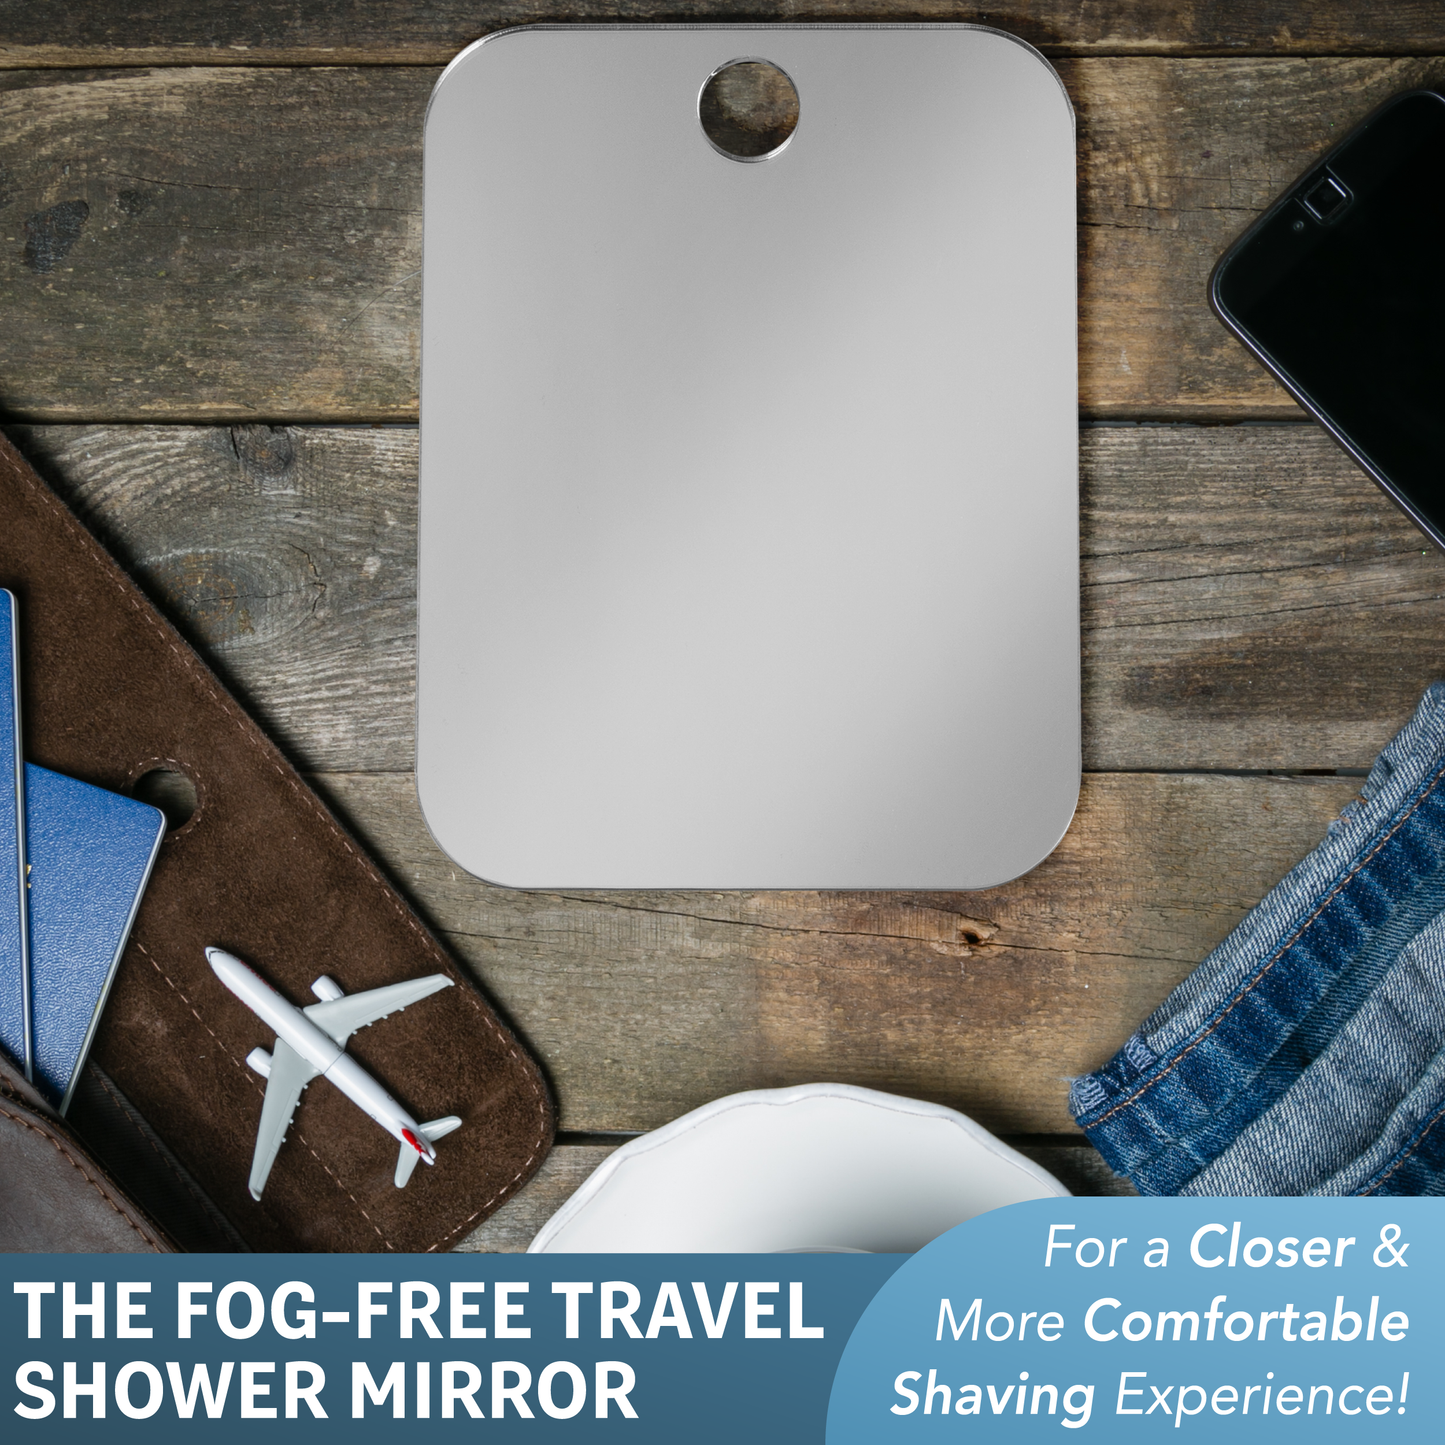 Shave Well Company Fog-Free Travel Mirror for Shaving